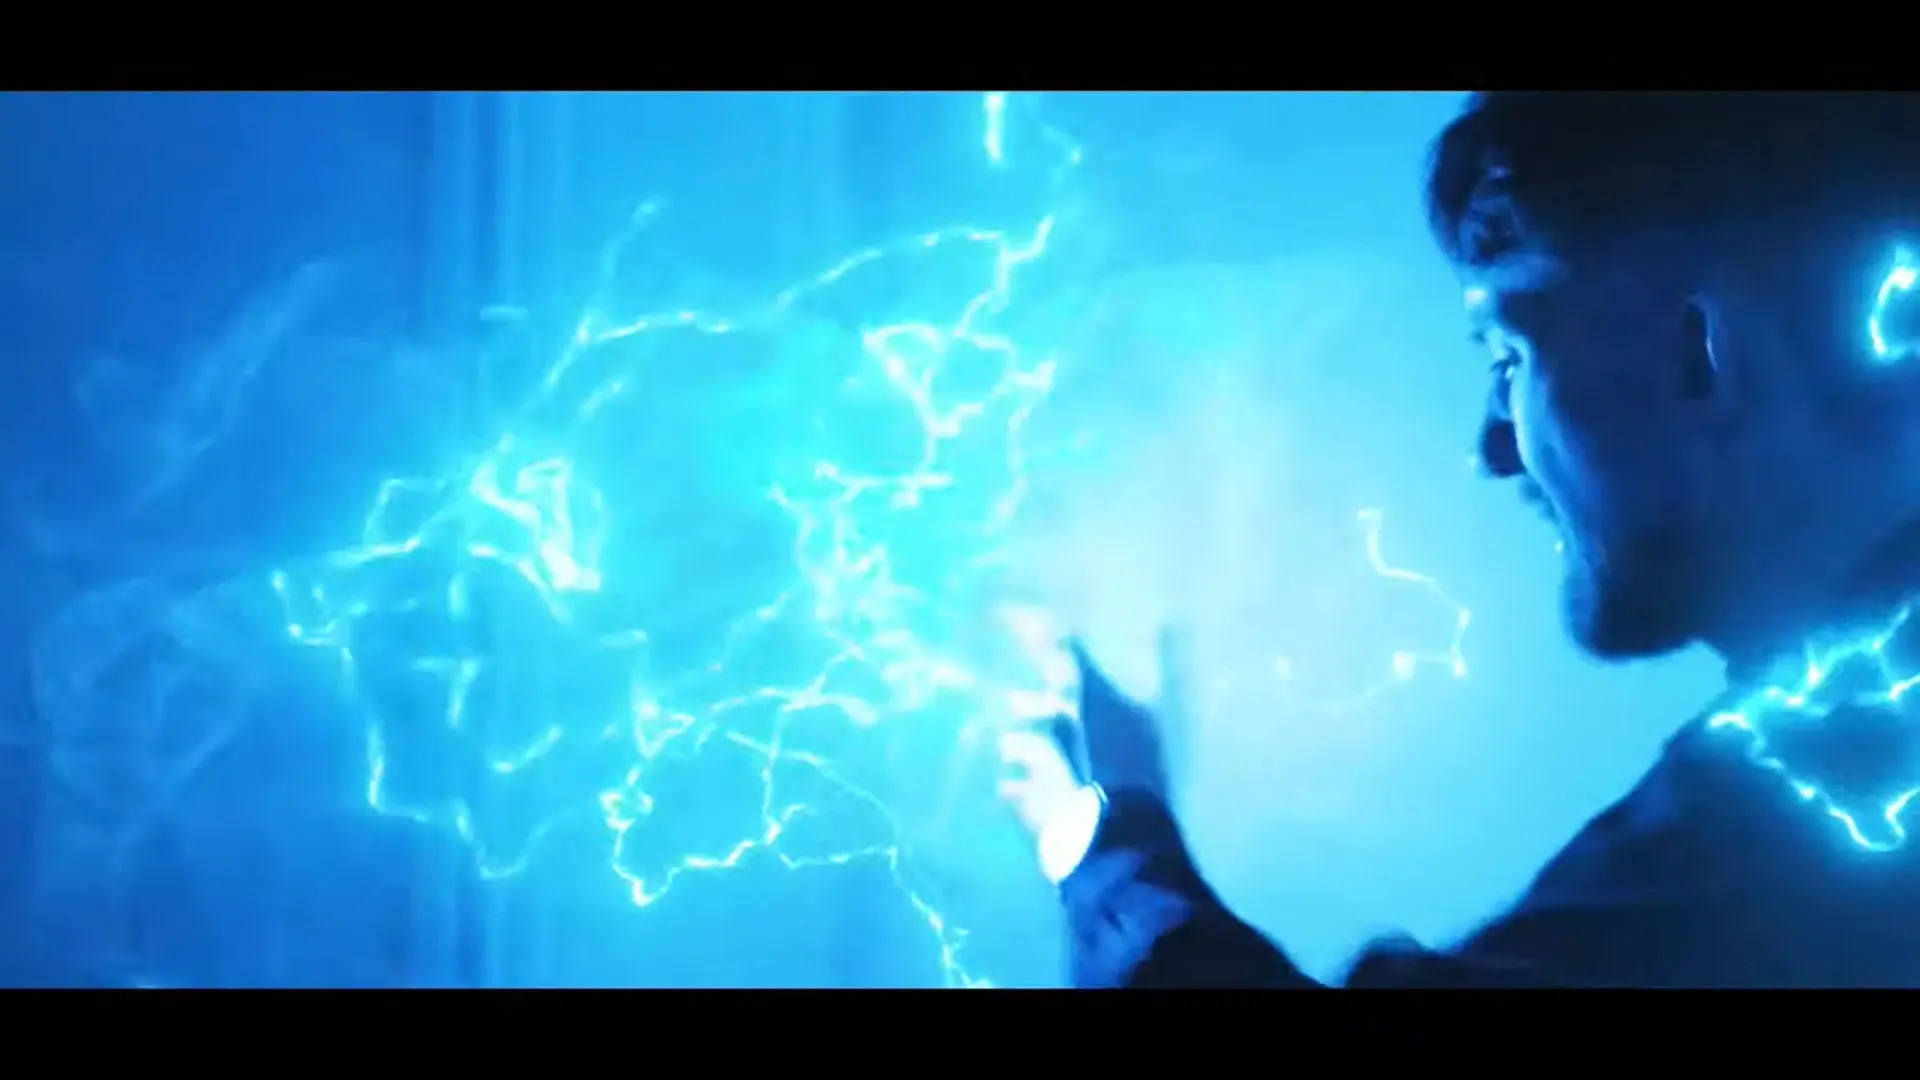 Still from the showreel showing a person putting their hand in electric waves